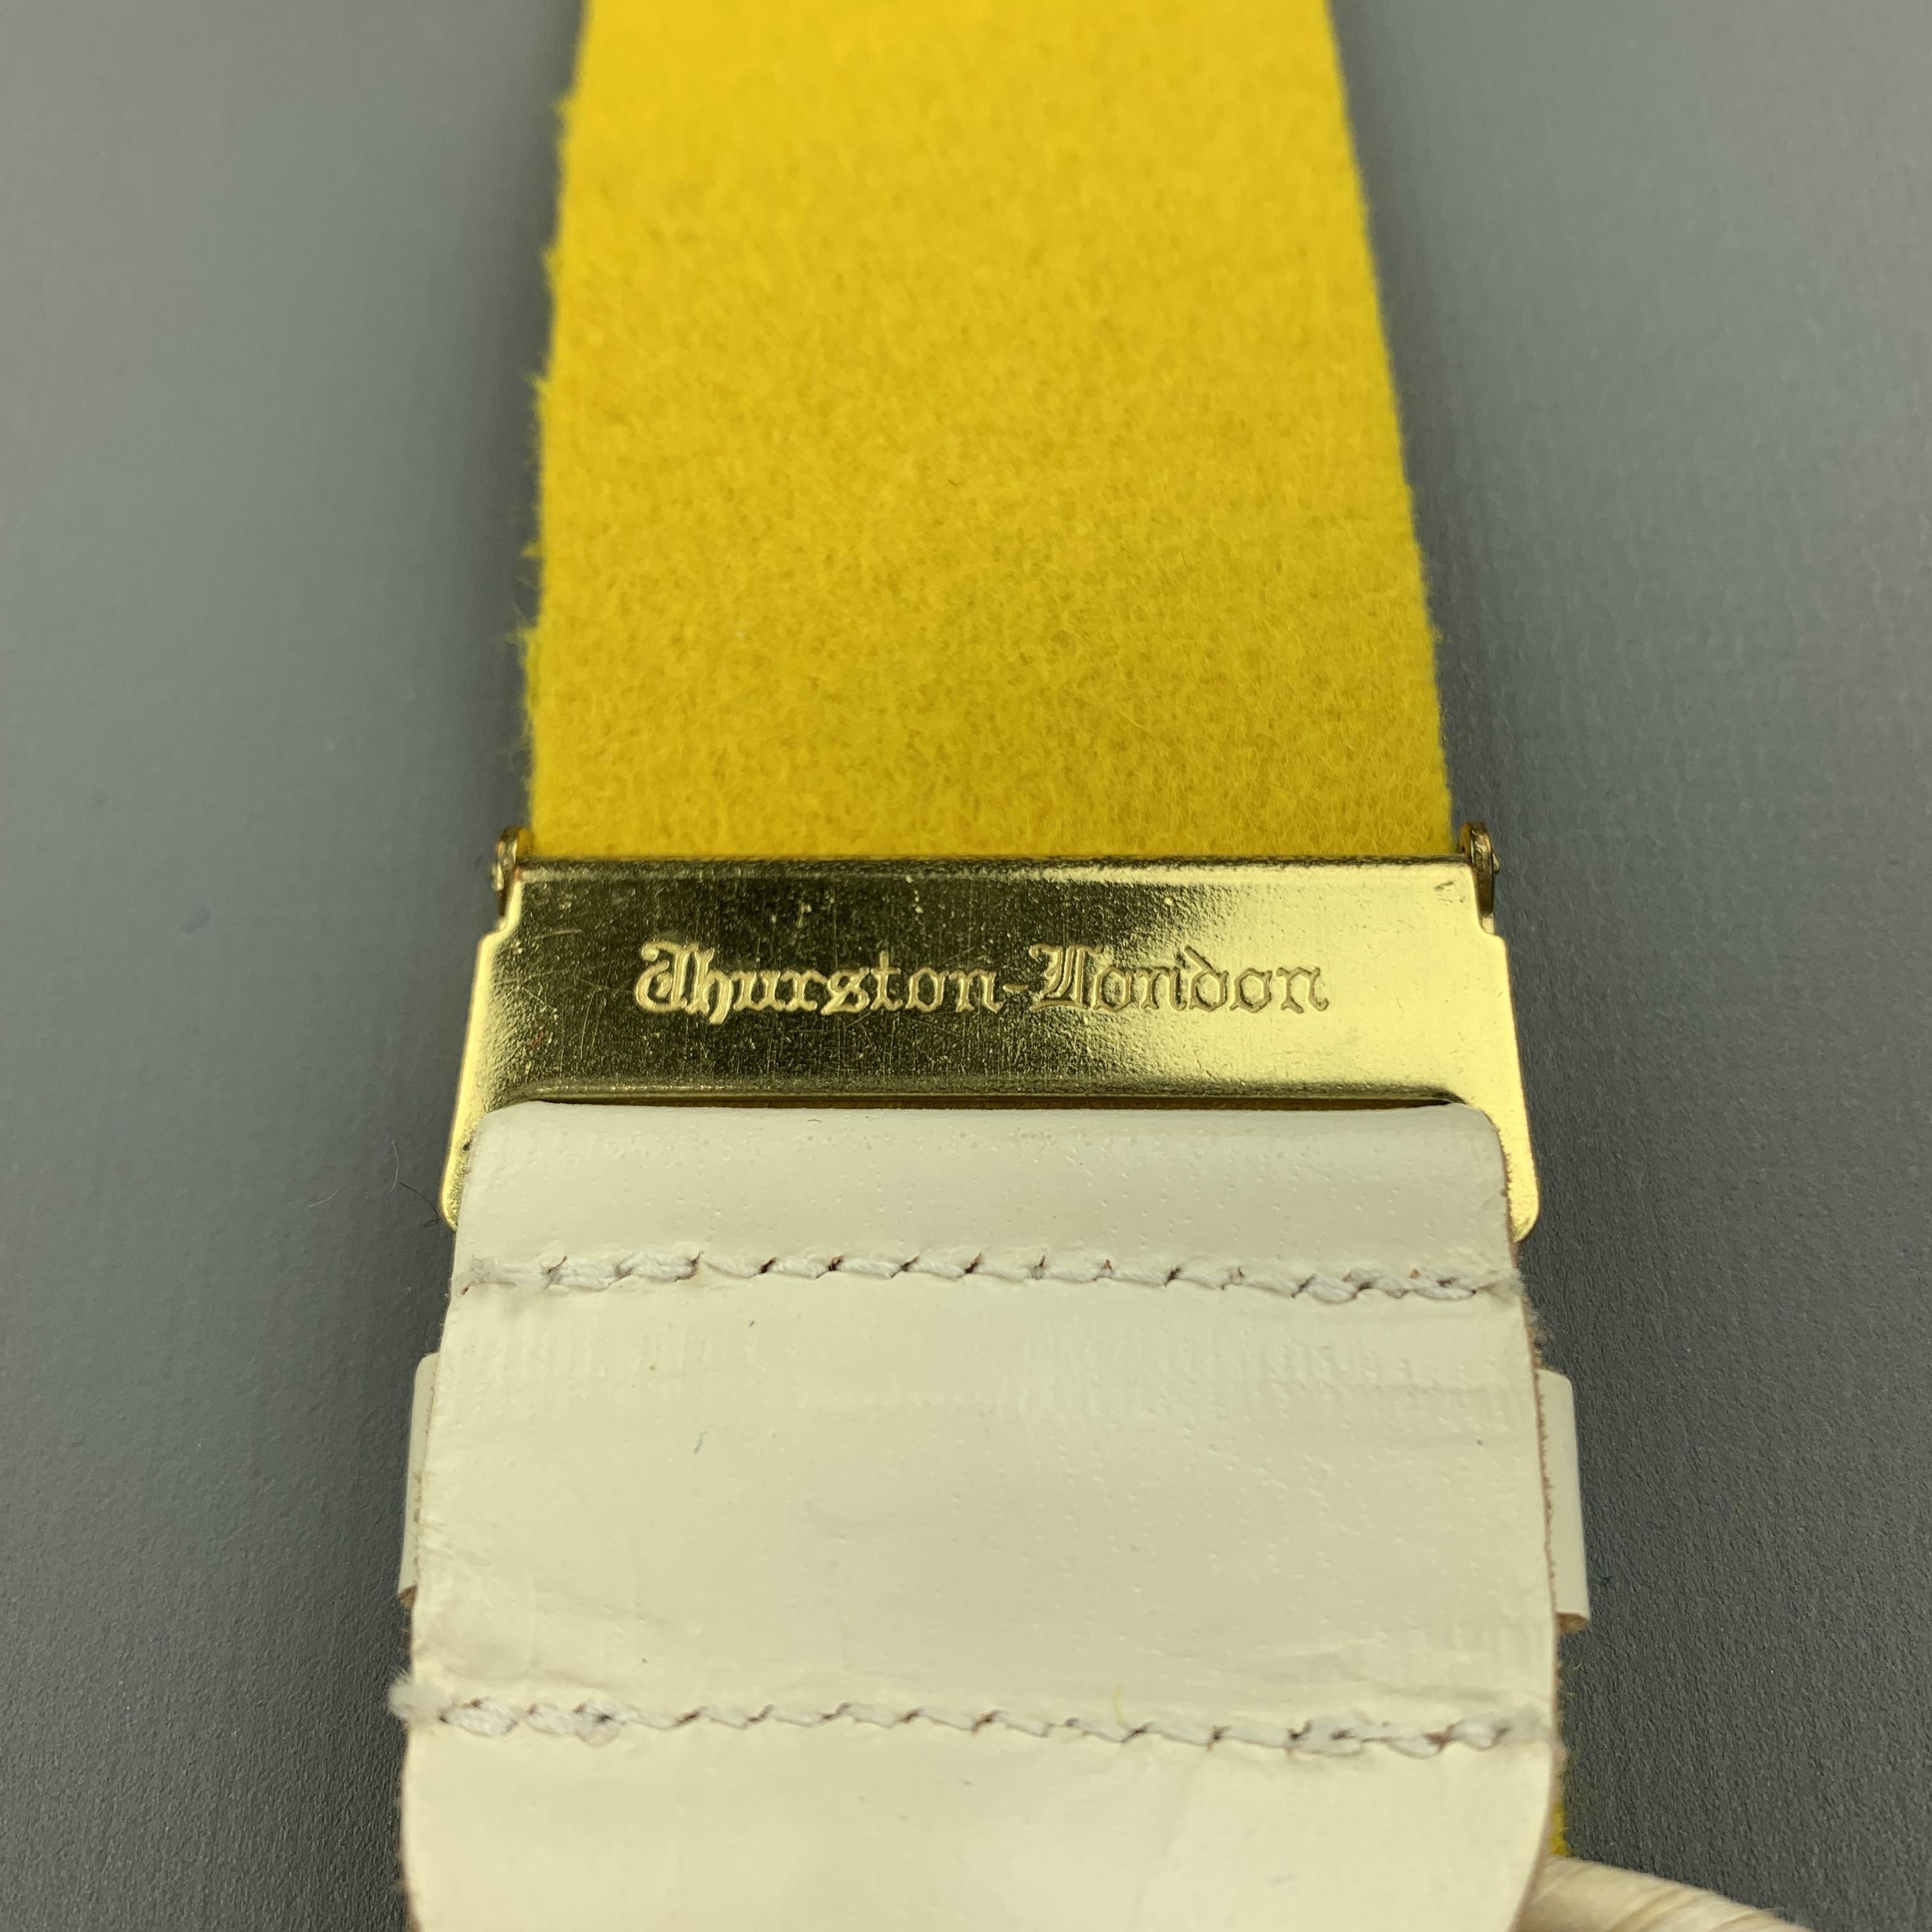 THURSTON LONDON suspenders comes in a yellow wool featuring a adjustable fit, leather trim, and includes trouser buttons. Made in England.

Excellent Pre-Owned Condition:

Measurements:

Width: 1.5 in.